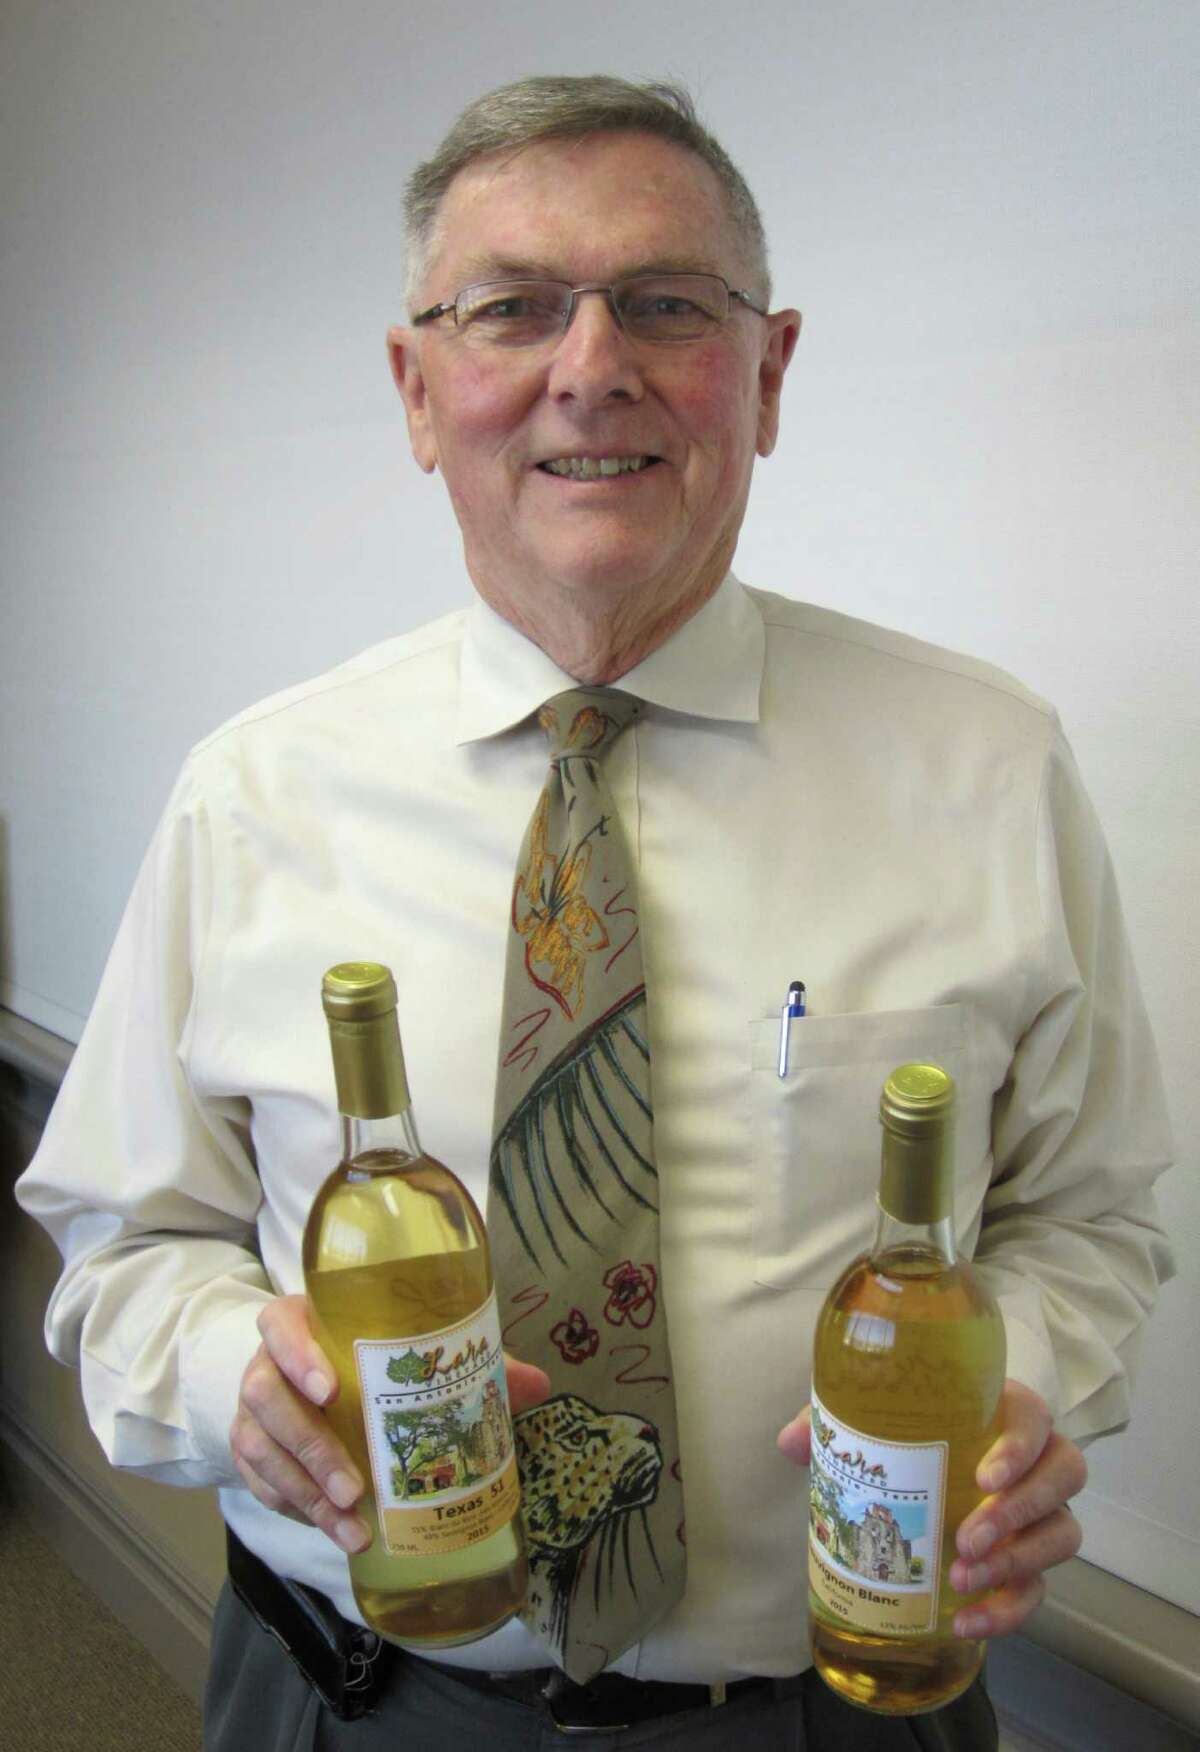 Intellectual property lawyer Ted Lee holds a couple bottles of wine produced by San Antonioâs Lara Vineyards.